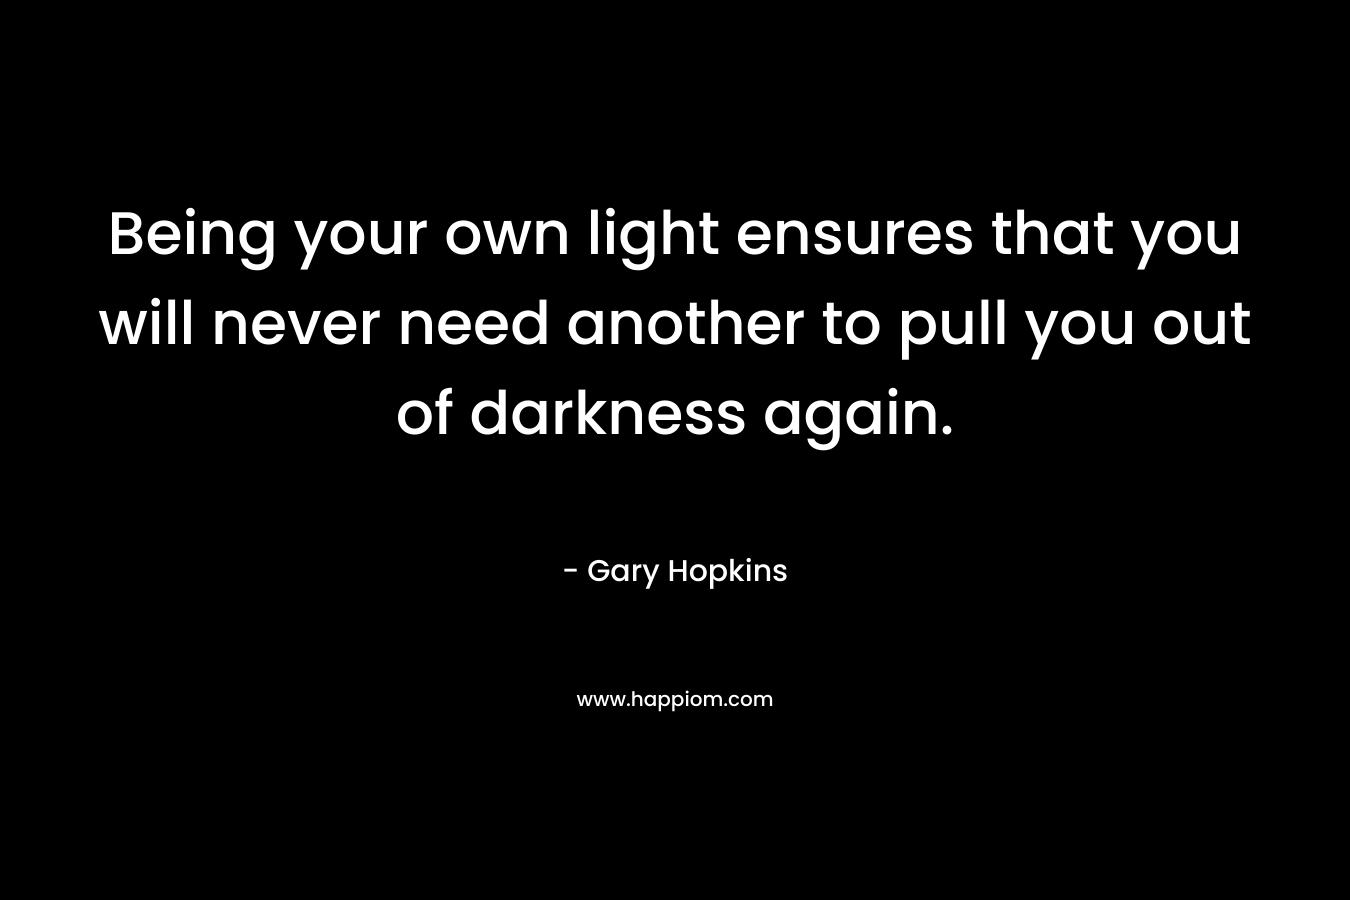 Being your own light ensures that you will never need another to pull you out of darkness again.